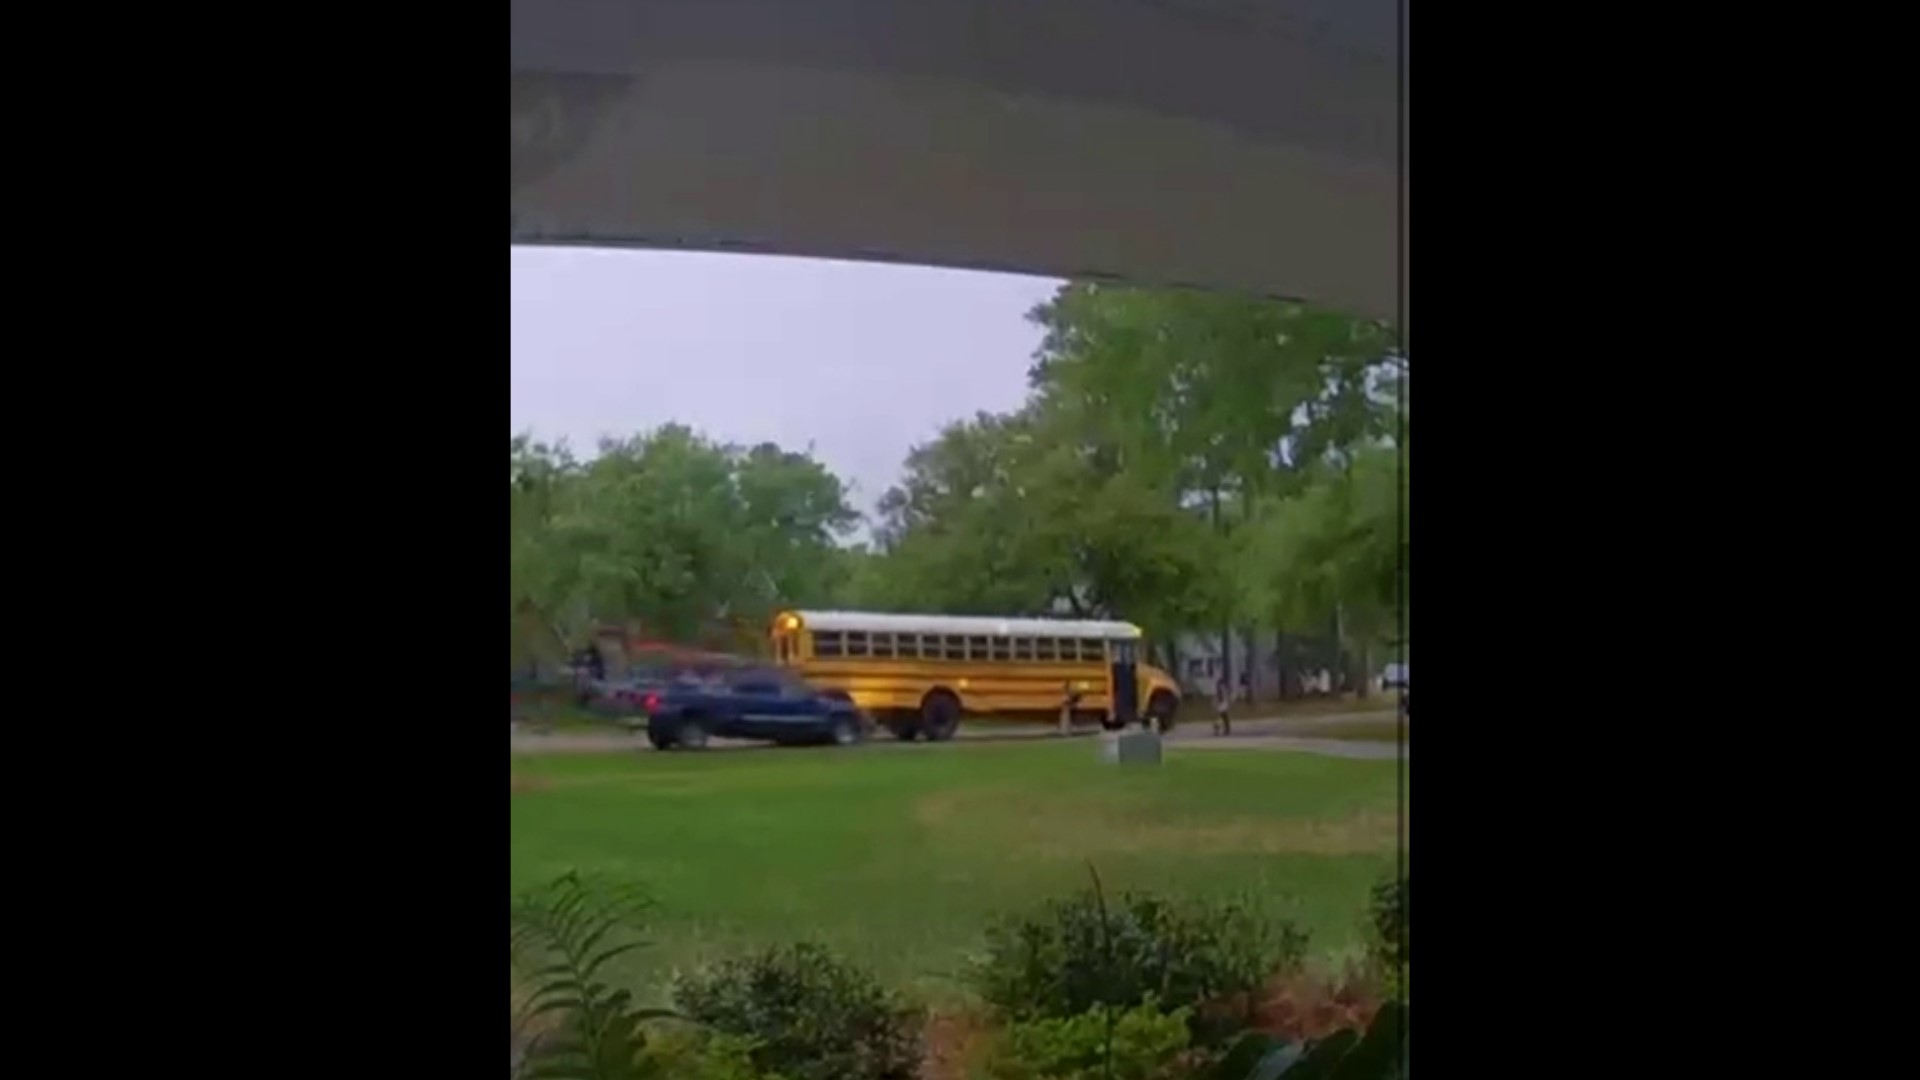 Doorbell camera captures the terrifying moment a pickup crashes into a school bus, child nearby.